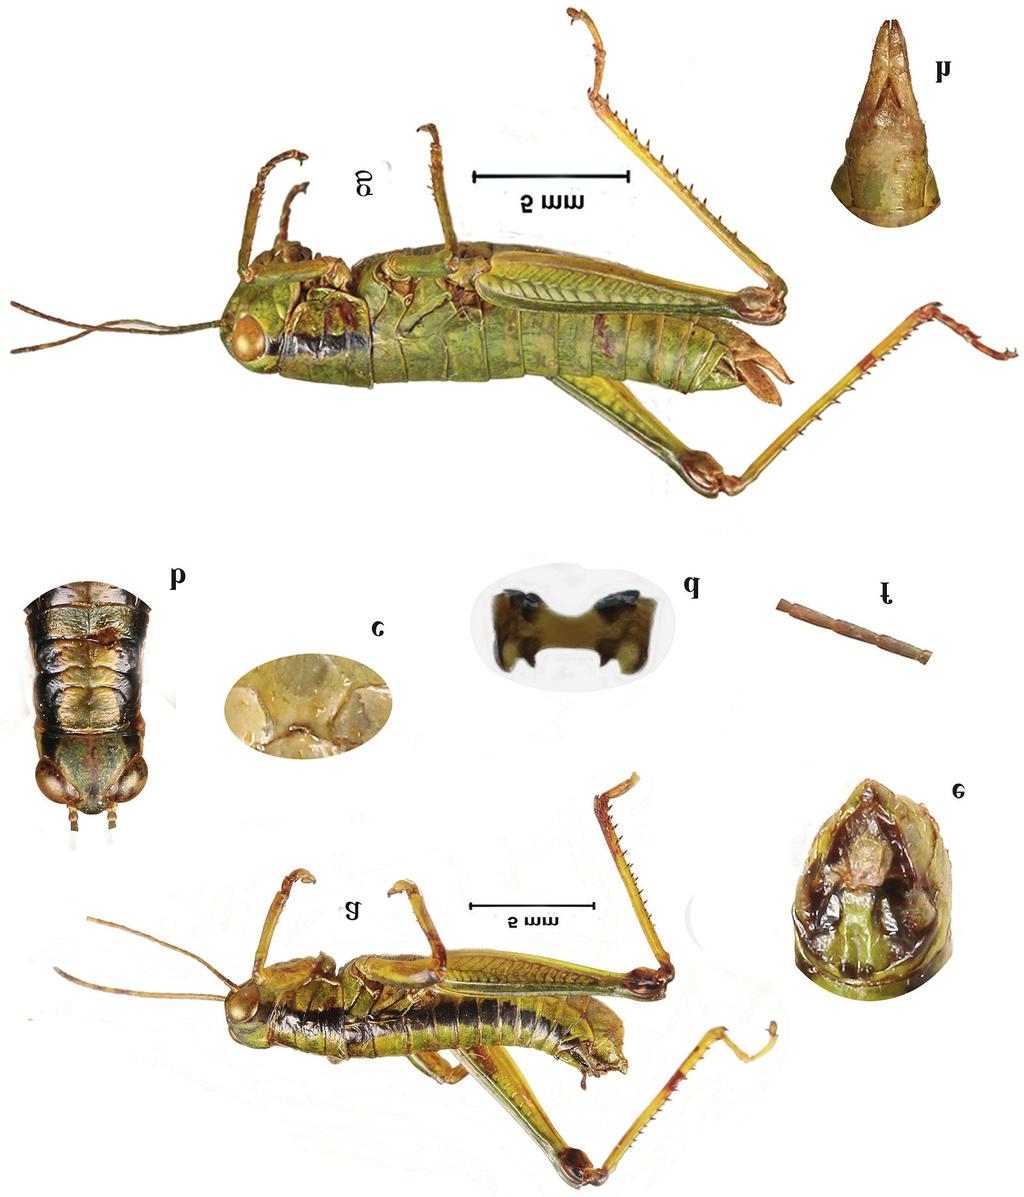 112 Li et al. ENTOMOL. FENNICA Vol. 26 Fig. 1. Photo of Zubovskya xiai sp. n. a. Male body in lateral view. b. Male head and pronotum in dorsal view. c. Male mesosternum in ventral view. d. Epiphallus.